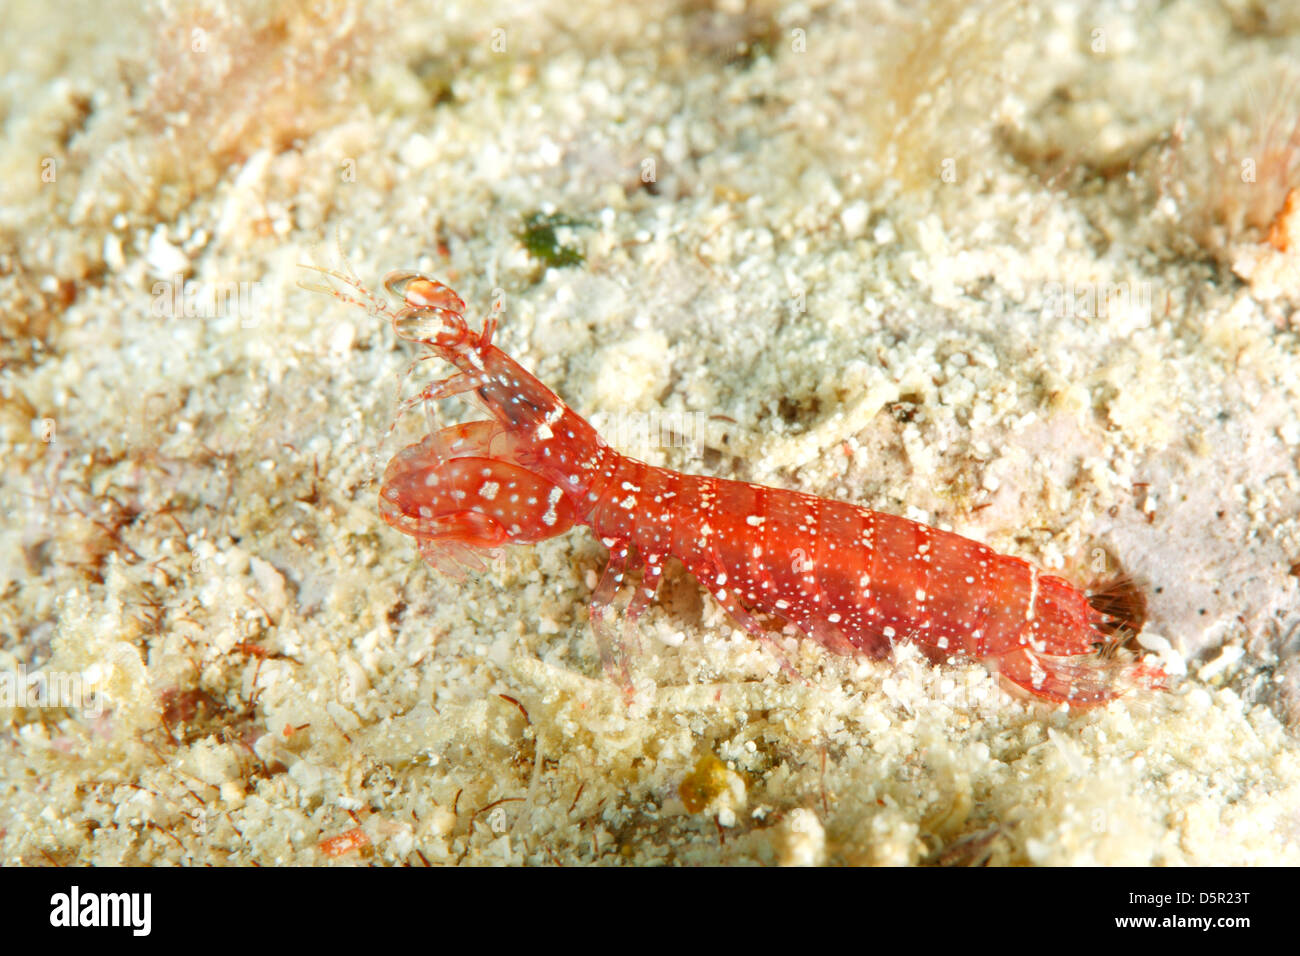 Mantis Shrimp, Gonodactylellus affinis. These tiny mantis shrimps are variable in color and live in cavities in coral rubble. Stock Photo